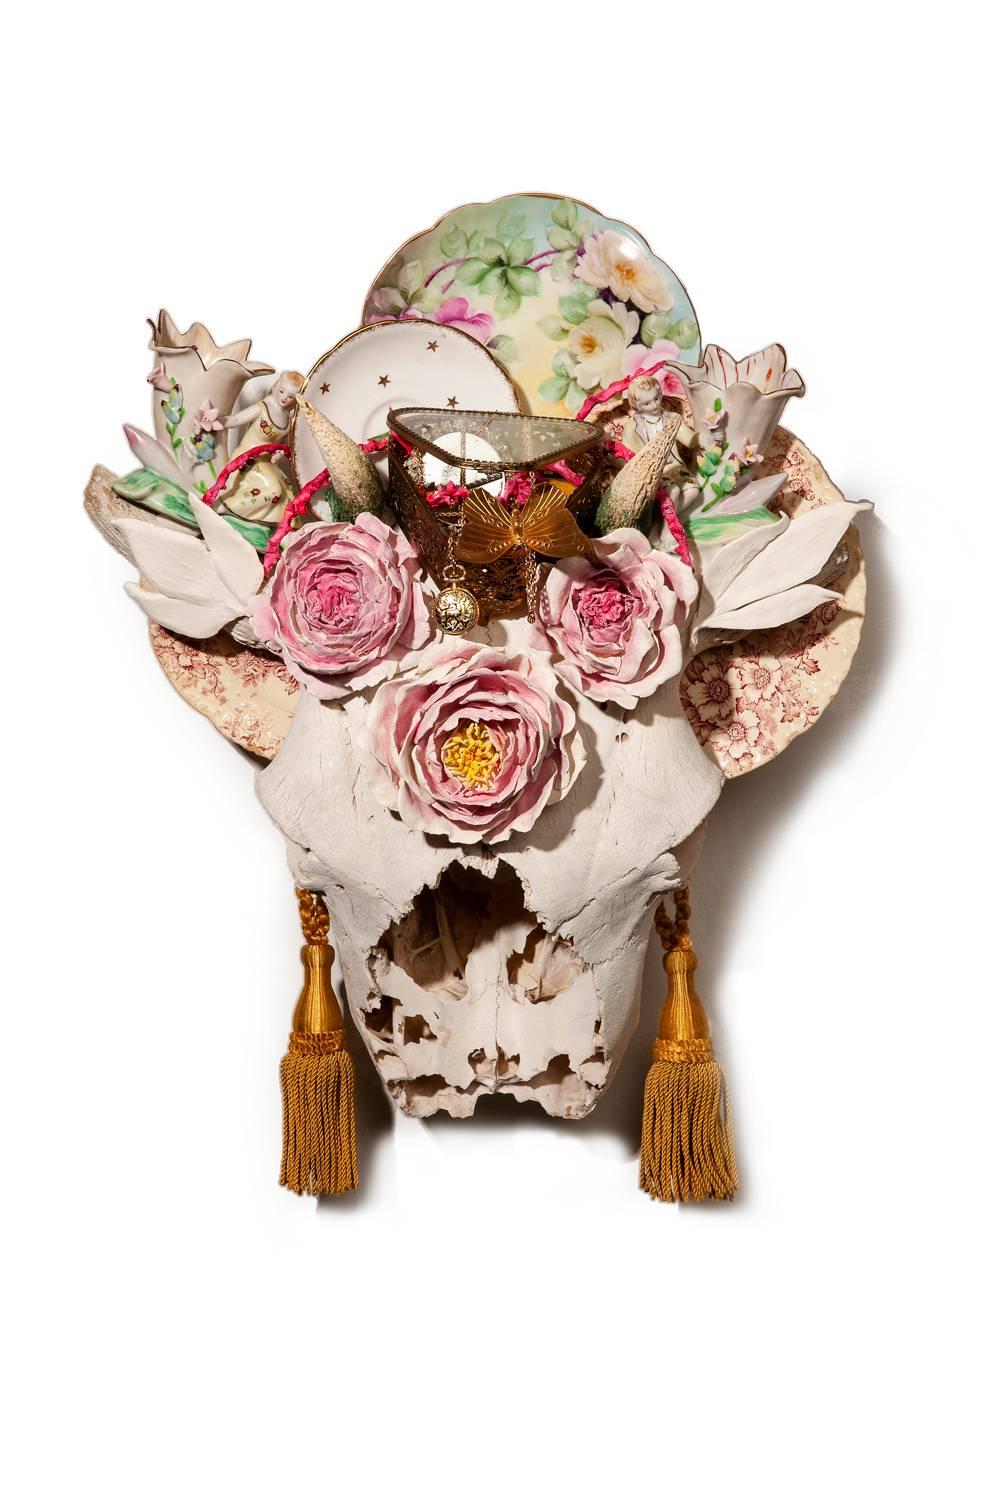 "Horns of Dilemma" sculpture, skull, found objects, handmade porcelain flowers - Sculpture by Marcy Lally